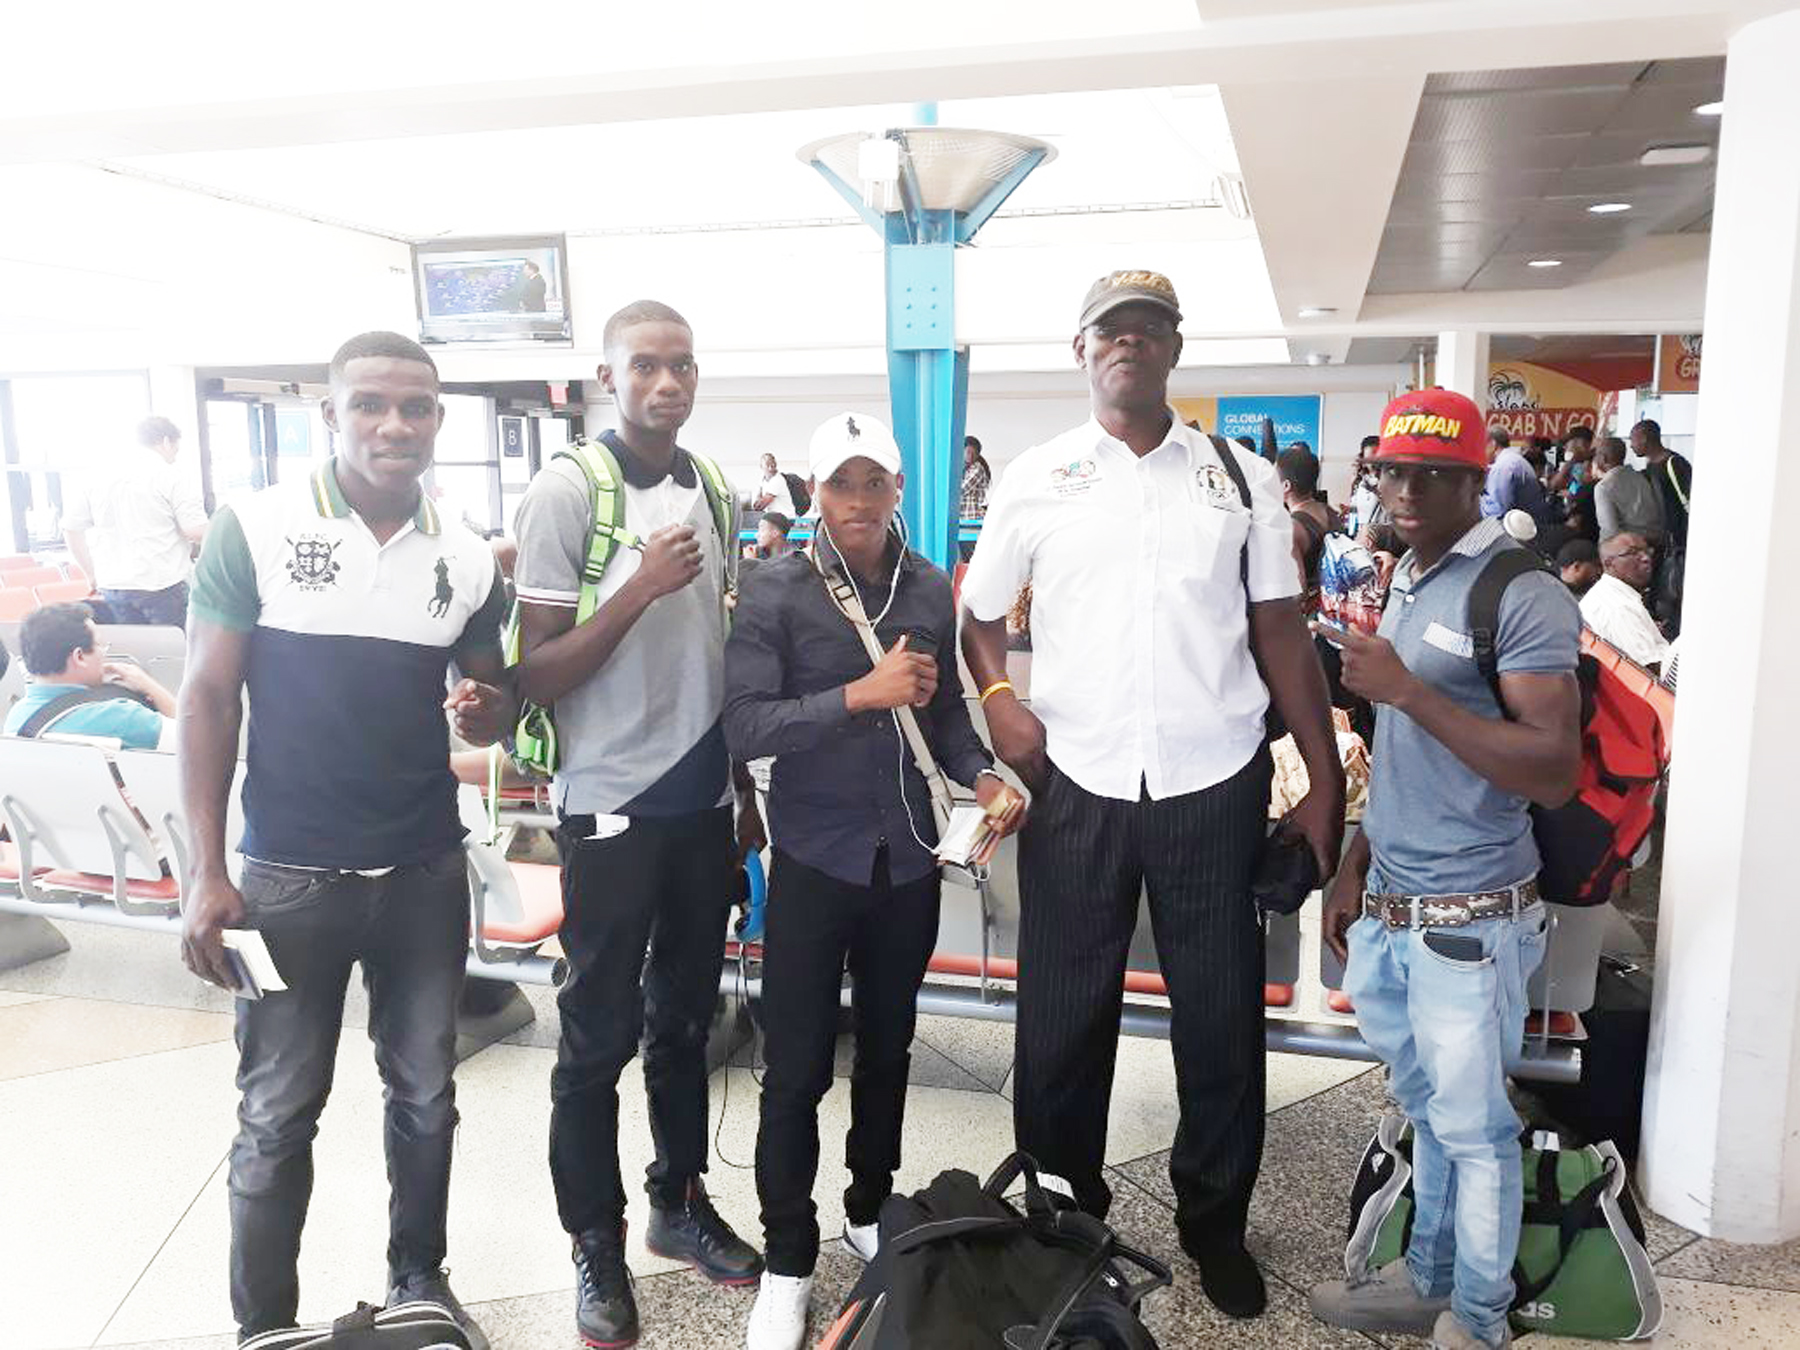 https://www.kaieteurnewsonline.com/images/2017/12/Coach-Terrence-Poole-and-his-boxers-at-Grantley-Adams-Airport-copy.jpg